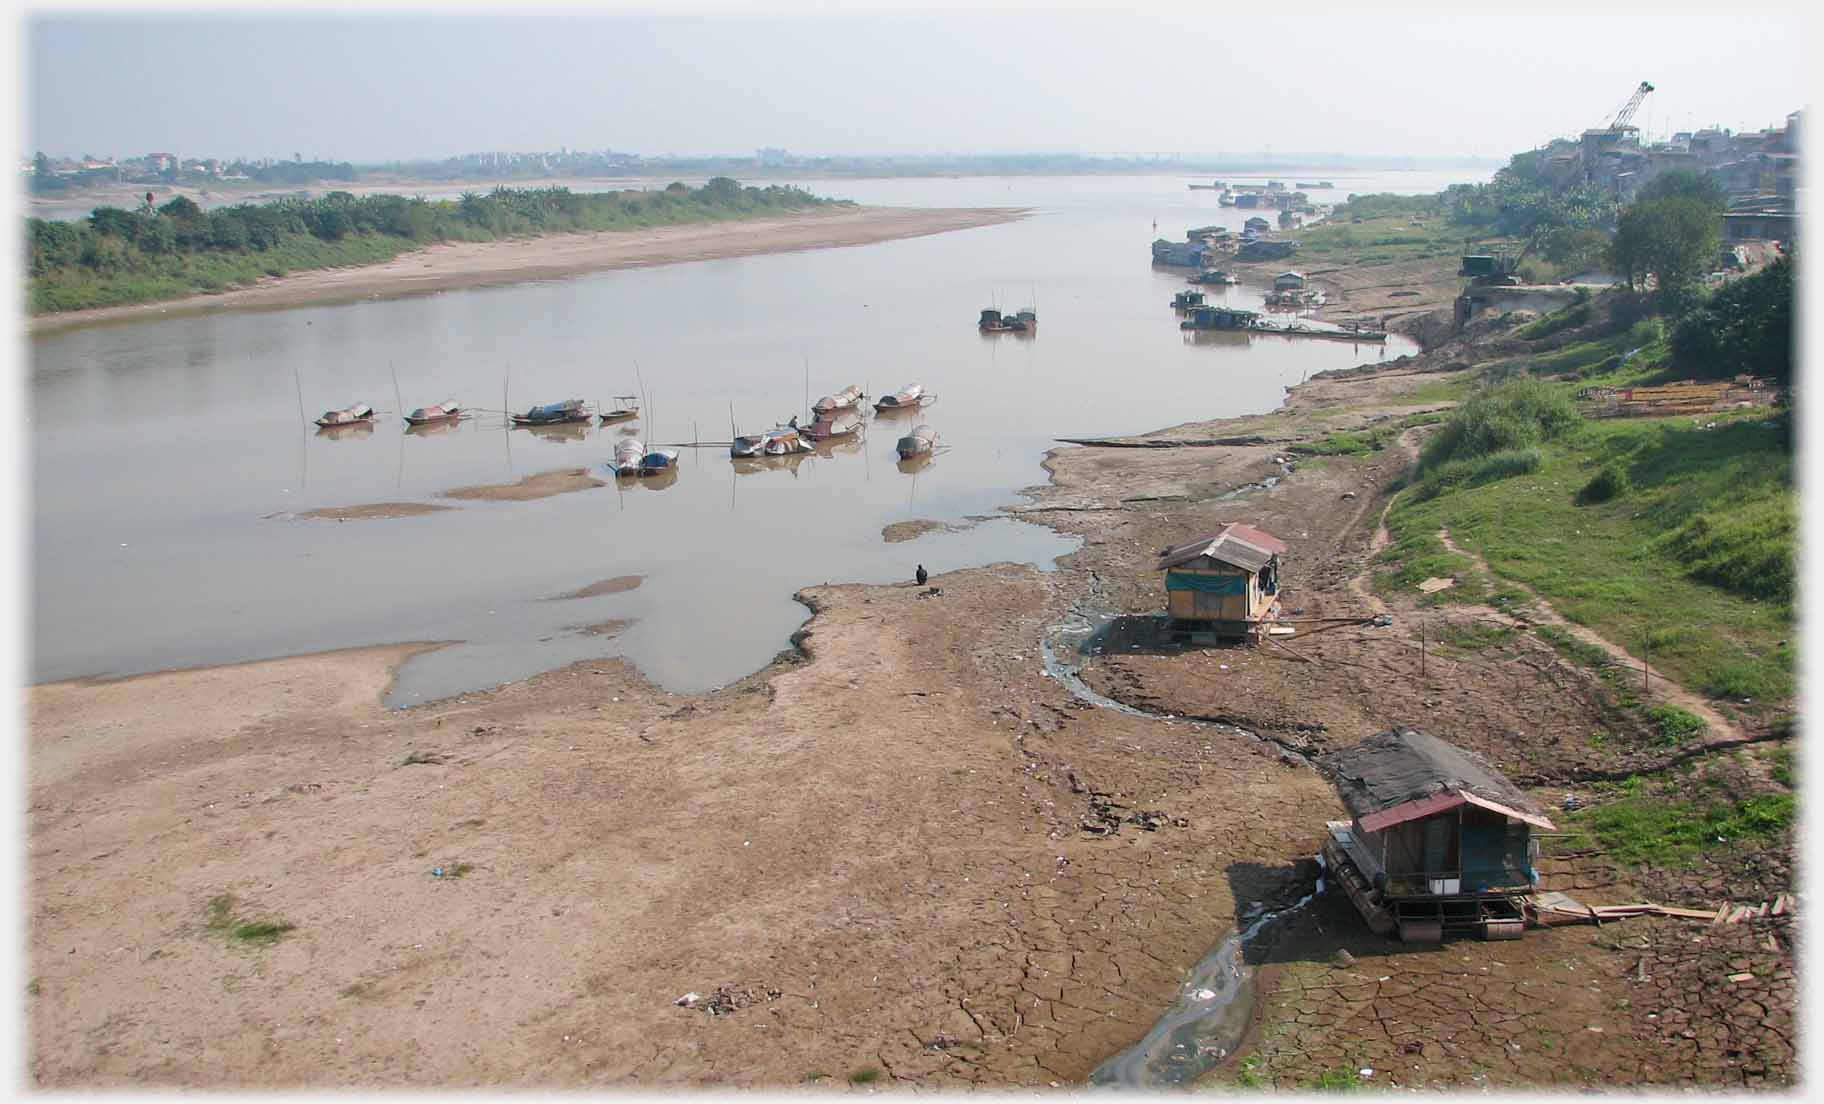 Overview of backwater opening to main river with mudflats and houseboats.